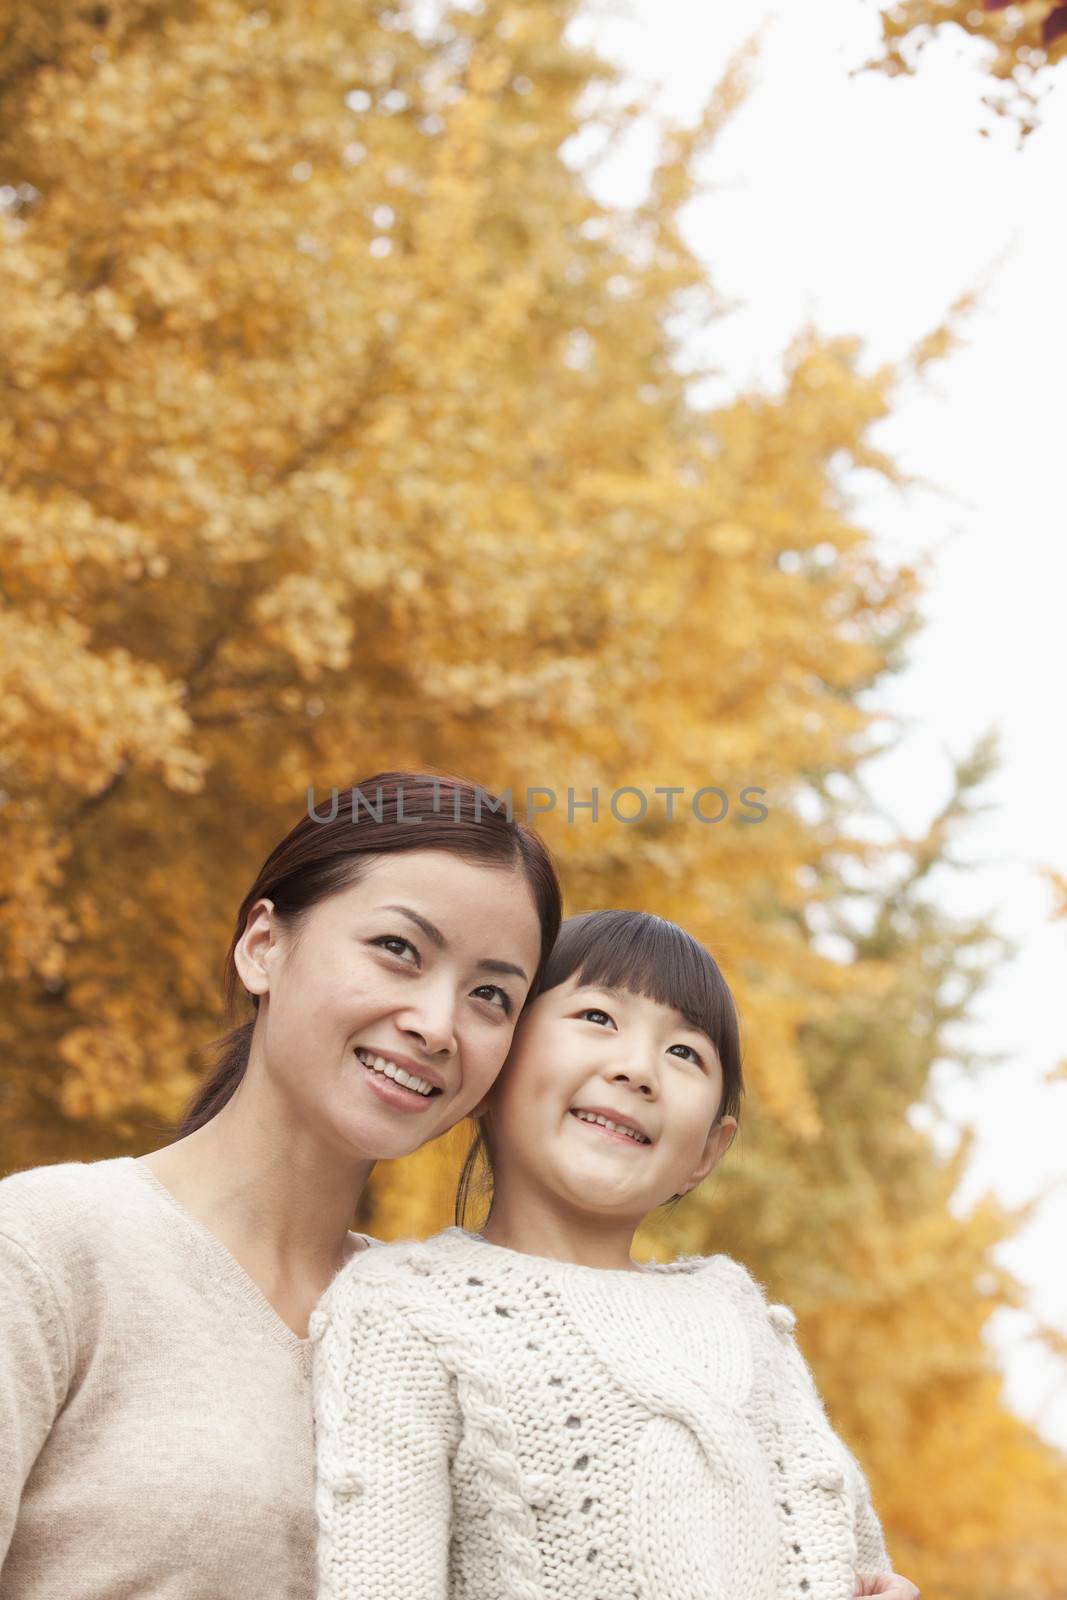 Mother and Daughter Enjoying a Park in Autumn